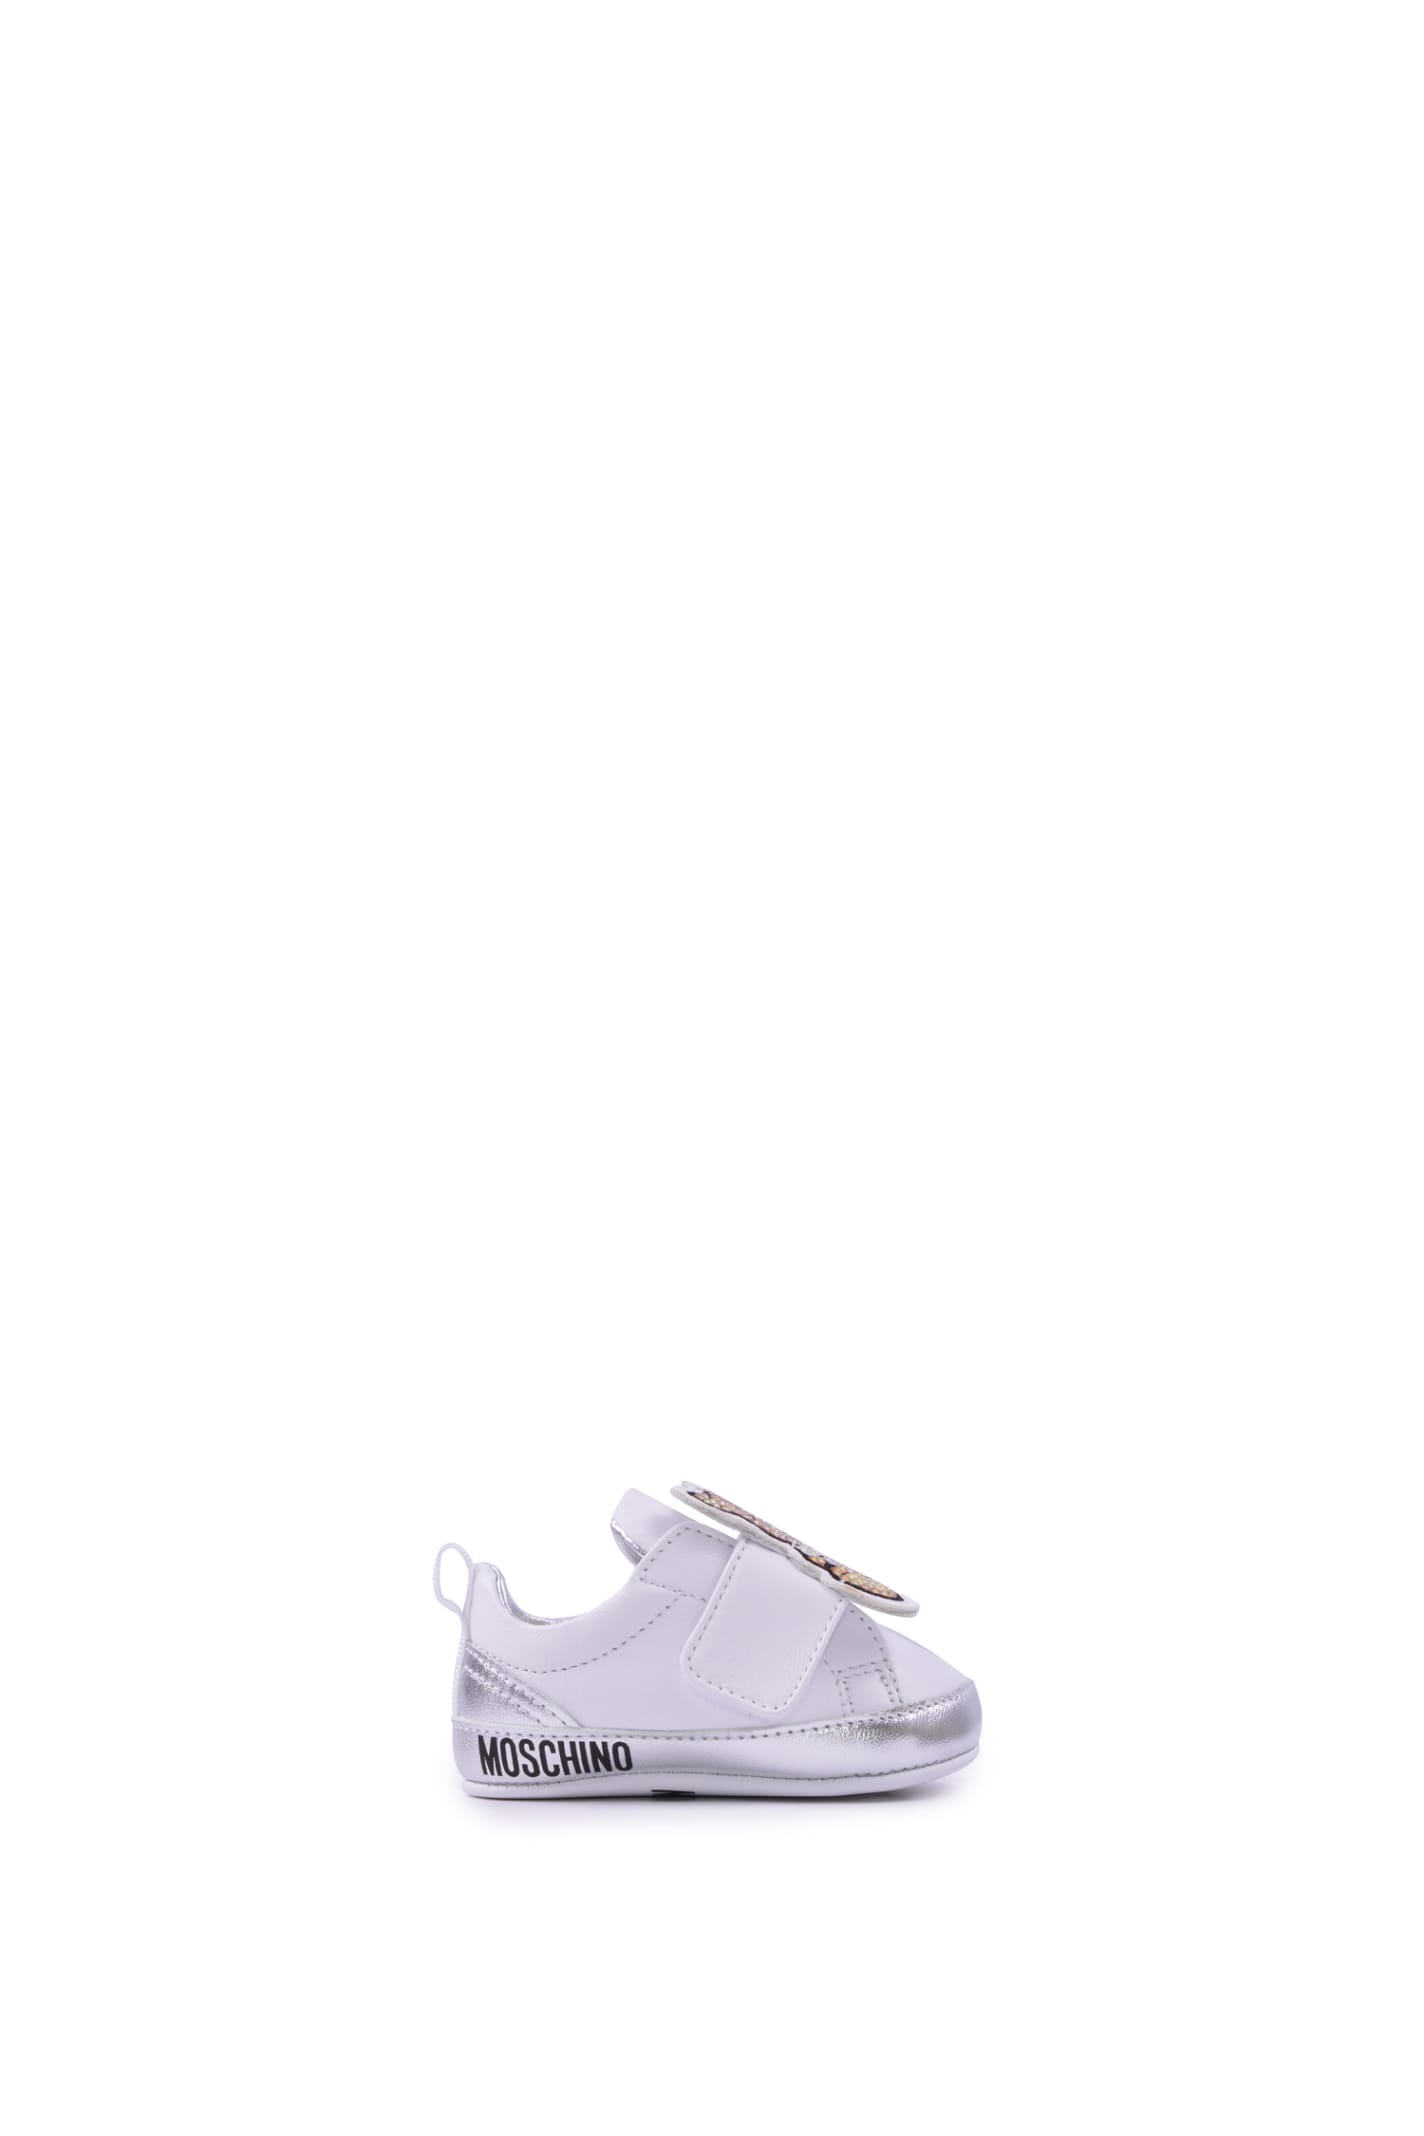 Moschino Crystal Teddy Leather Sneakers